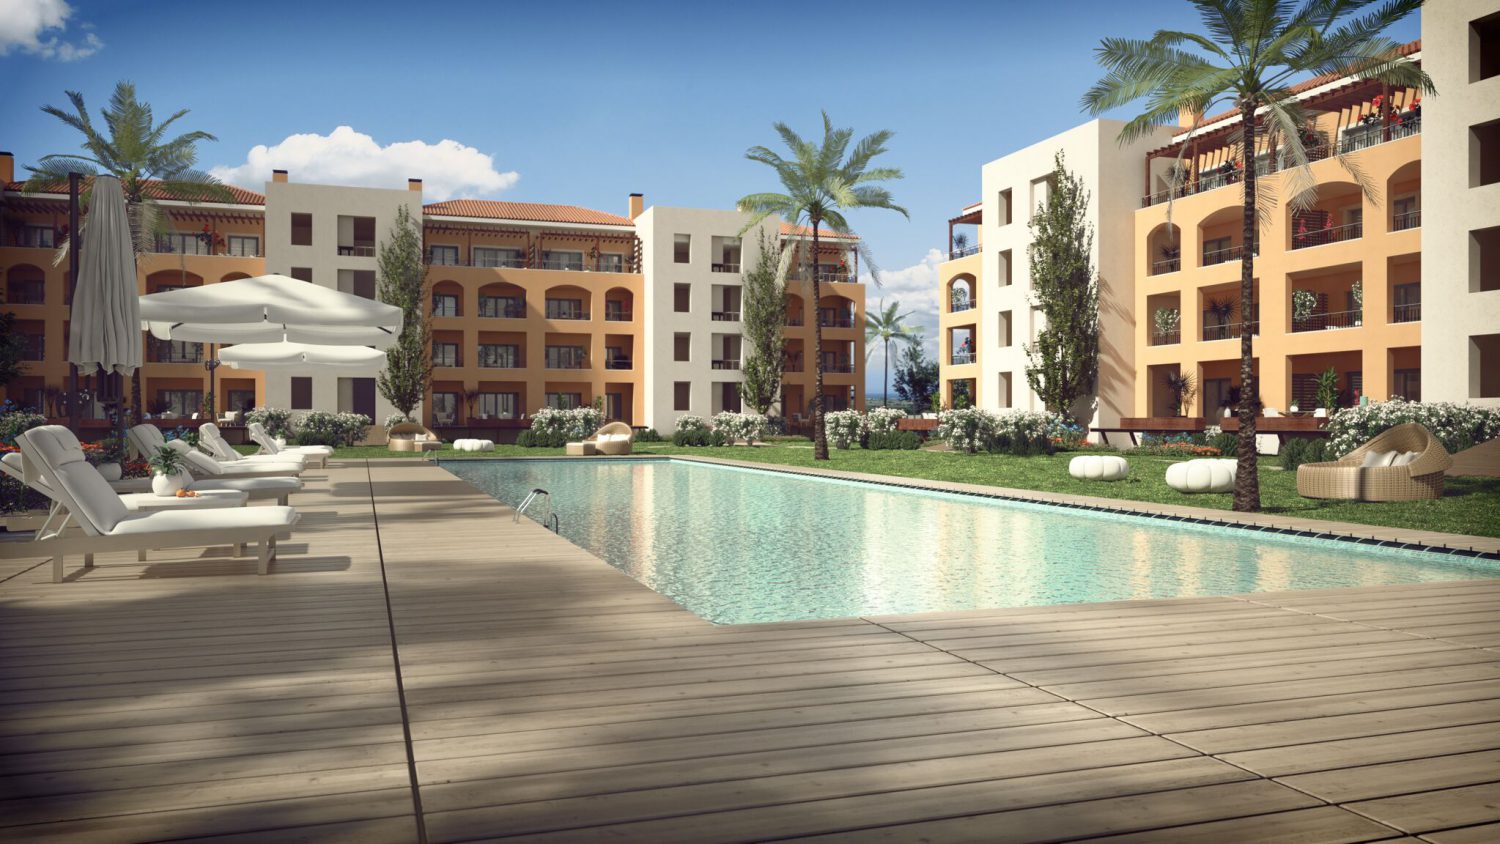 Tecnovia SA reinforces its building operations with the constructing of the Gardens Vilamoura condominium